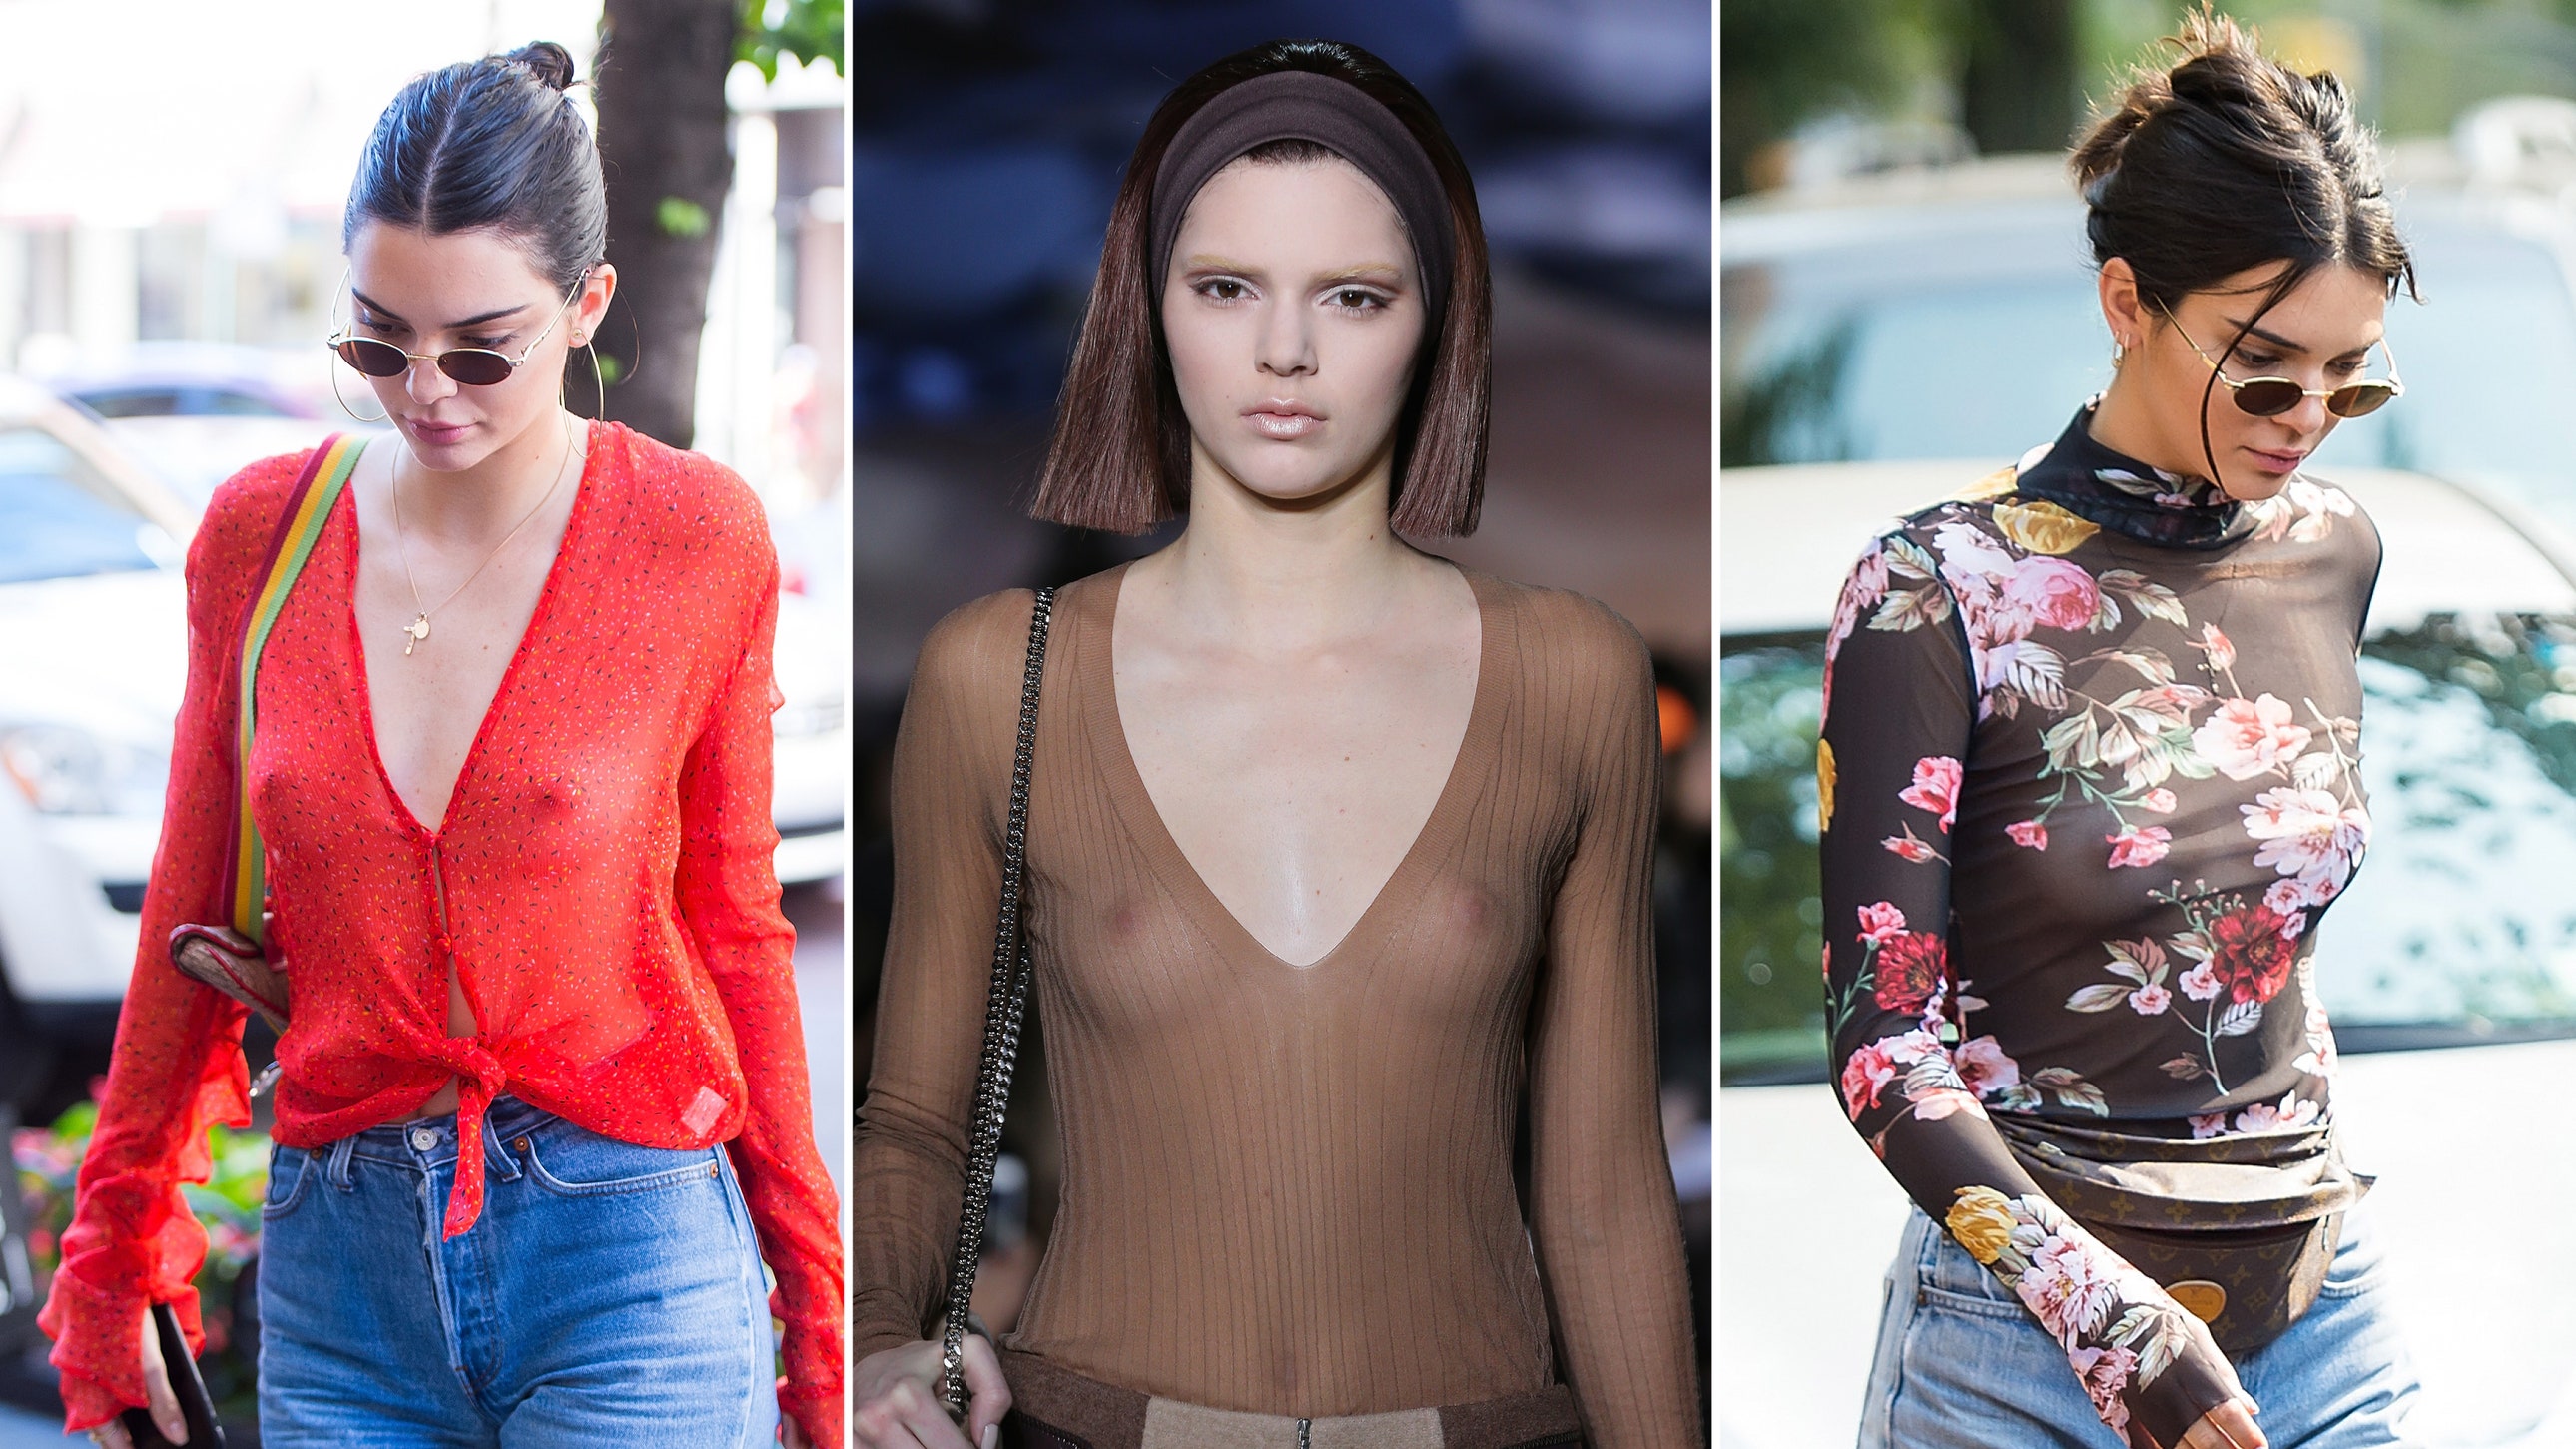 becky schomer recommends kendall jenner nippel pic